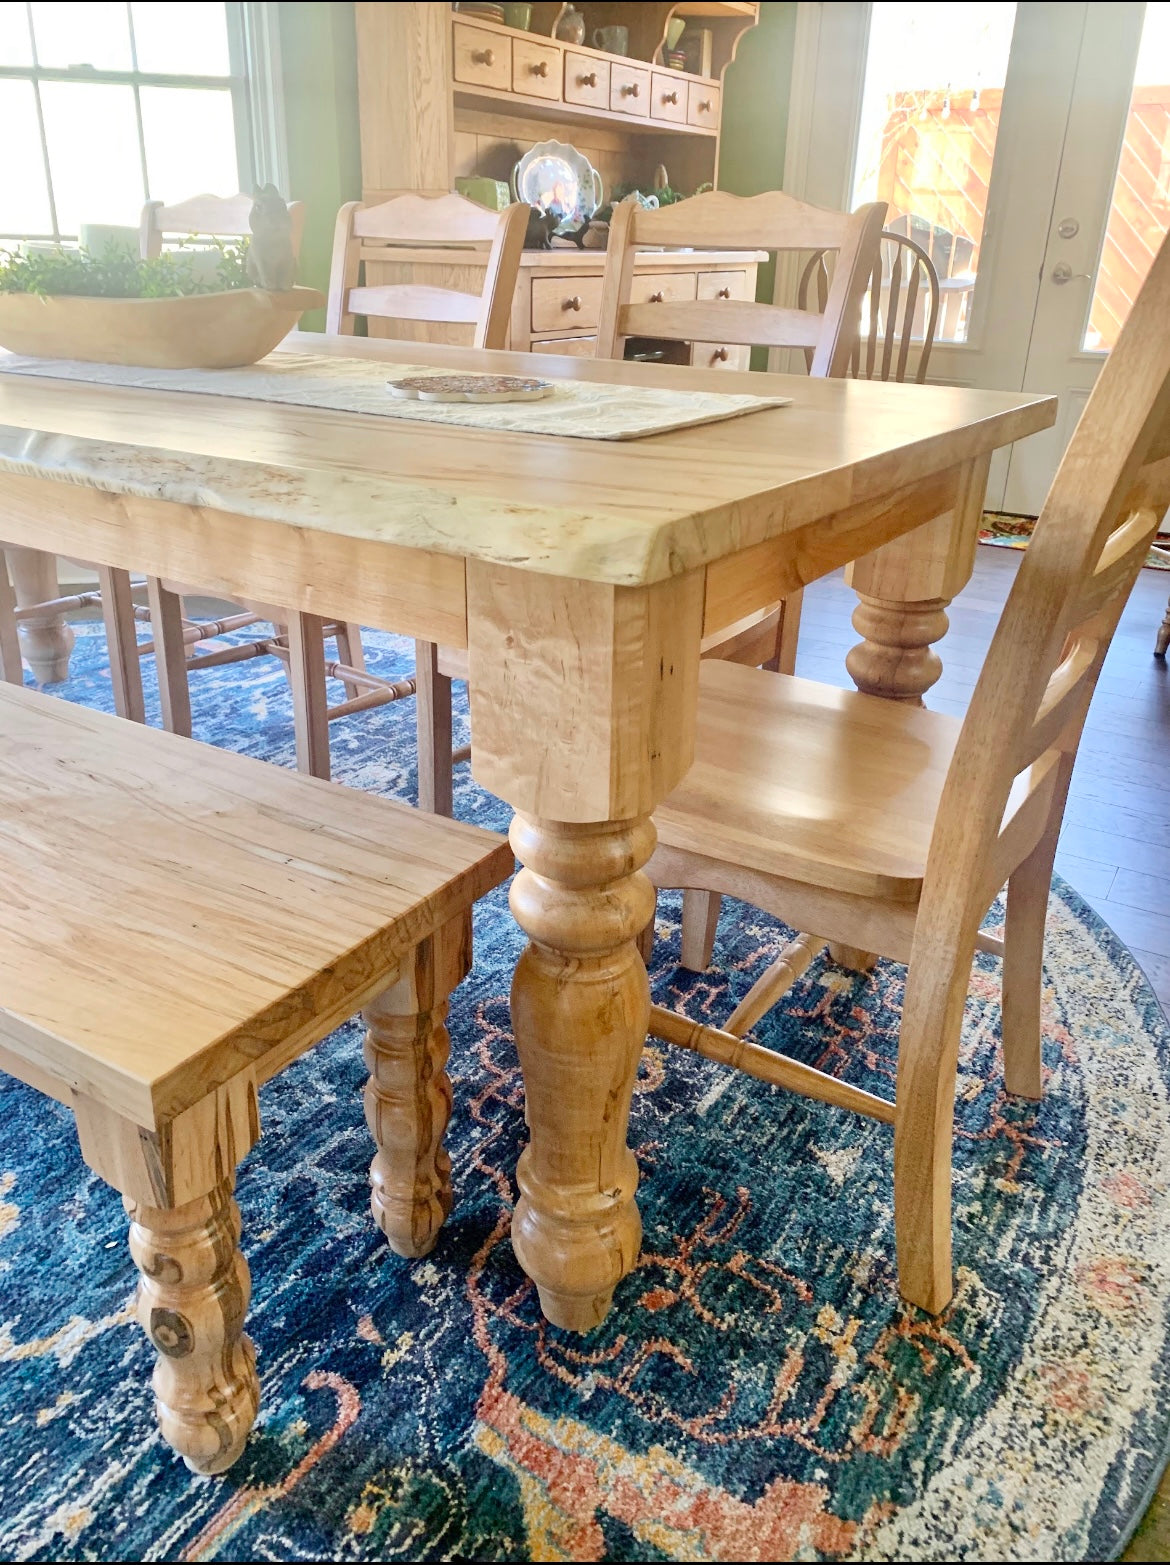 Pictured with a 7'L x 36"W Ambrosia Maple table in a Natural finish. Pictured with a Matching Bench and 5 Magnolia Chairs.